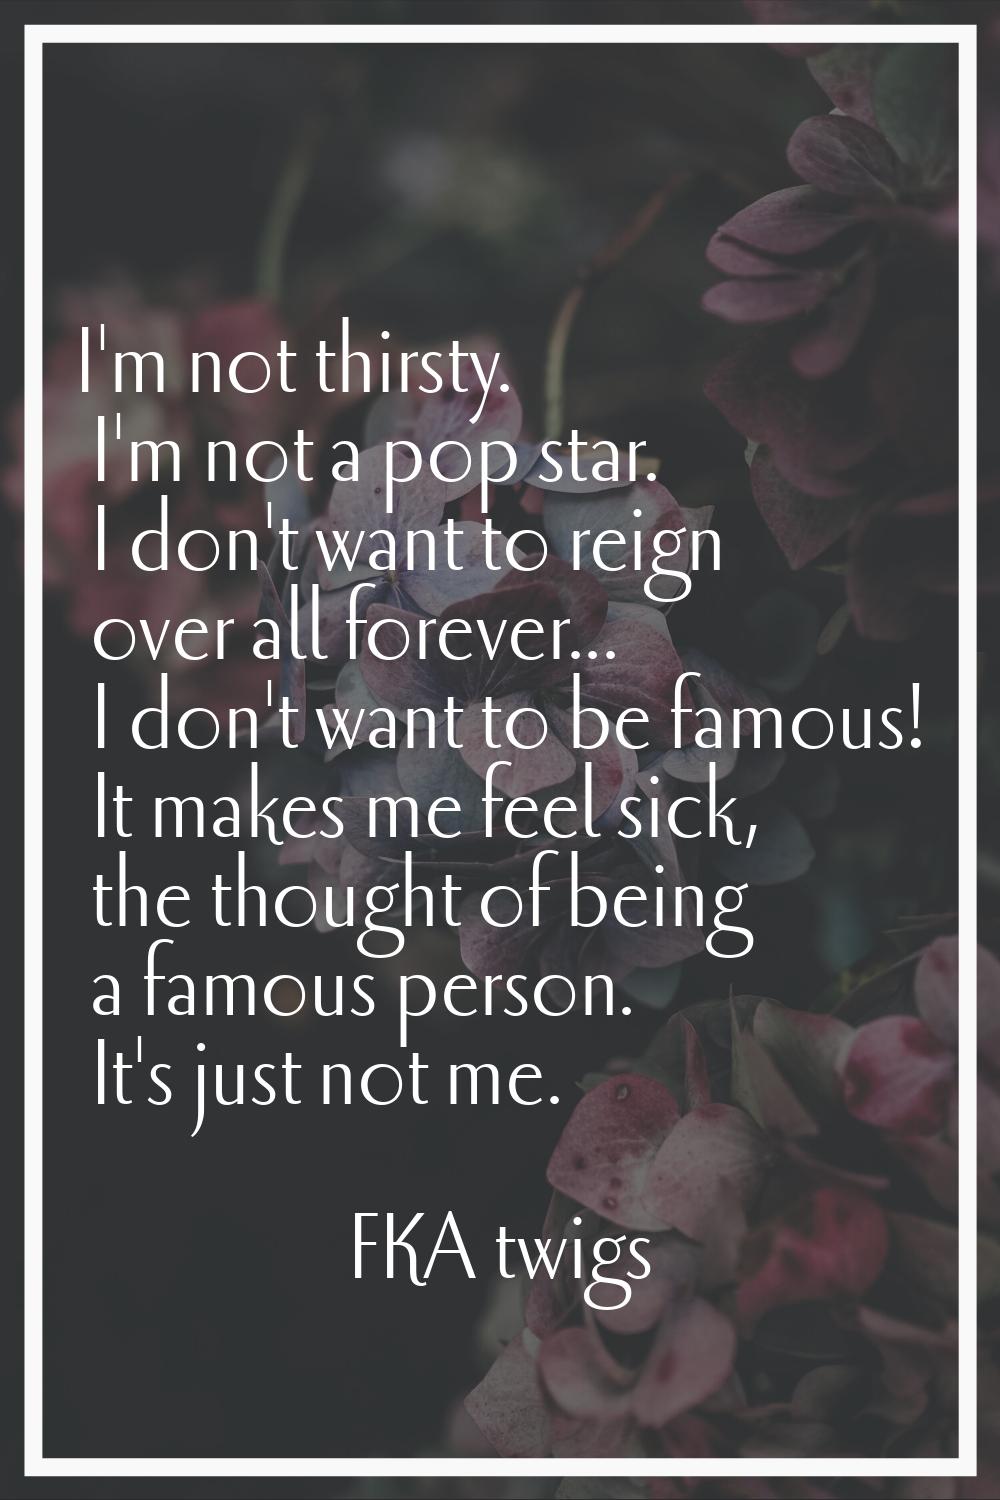 I'm not thirsty. I'm not a pop star. I don't want to reign over all forever... I don't want to be f